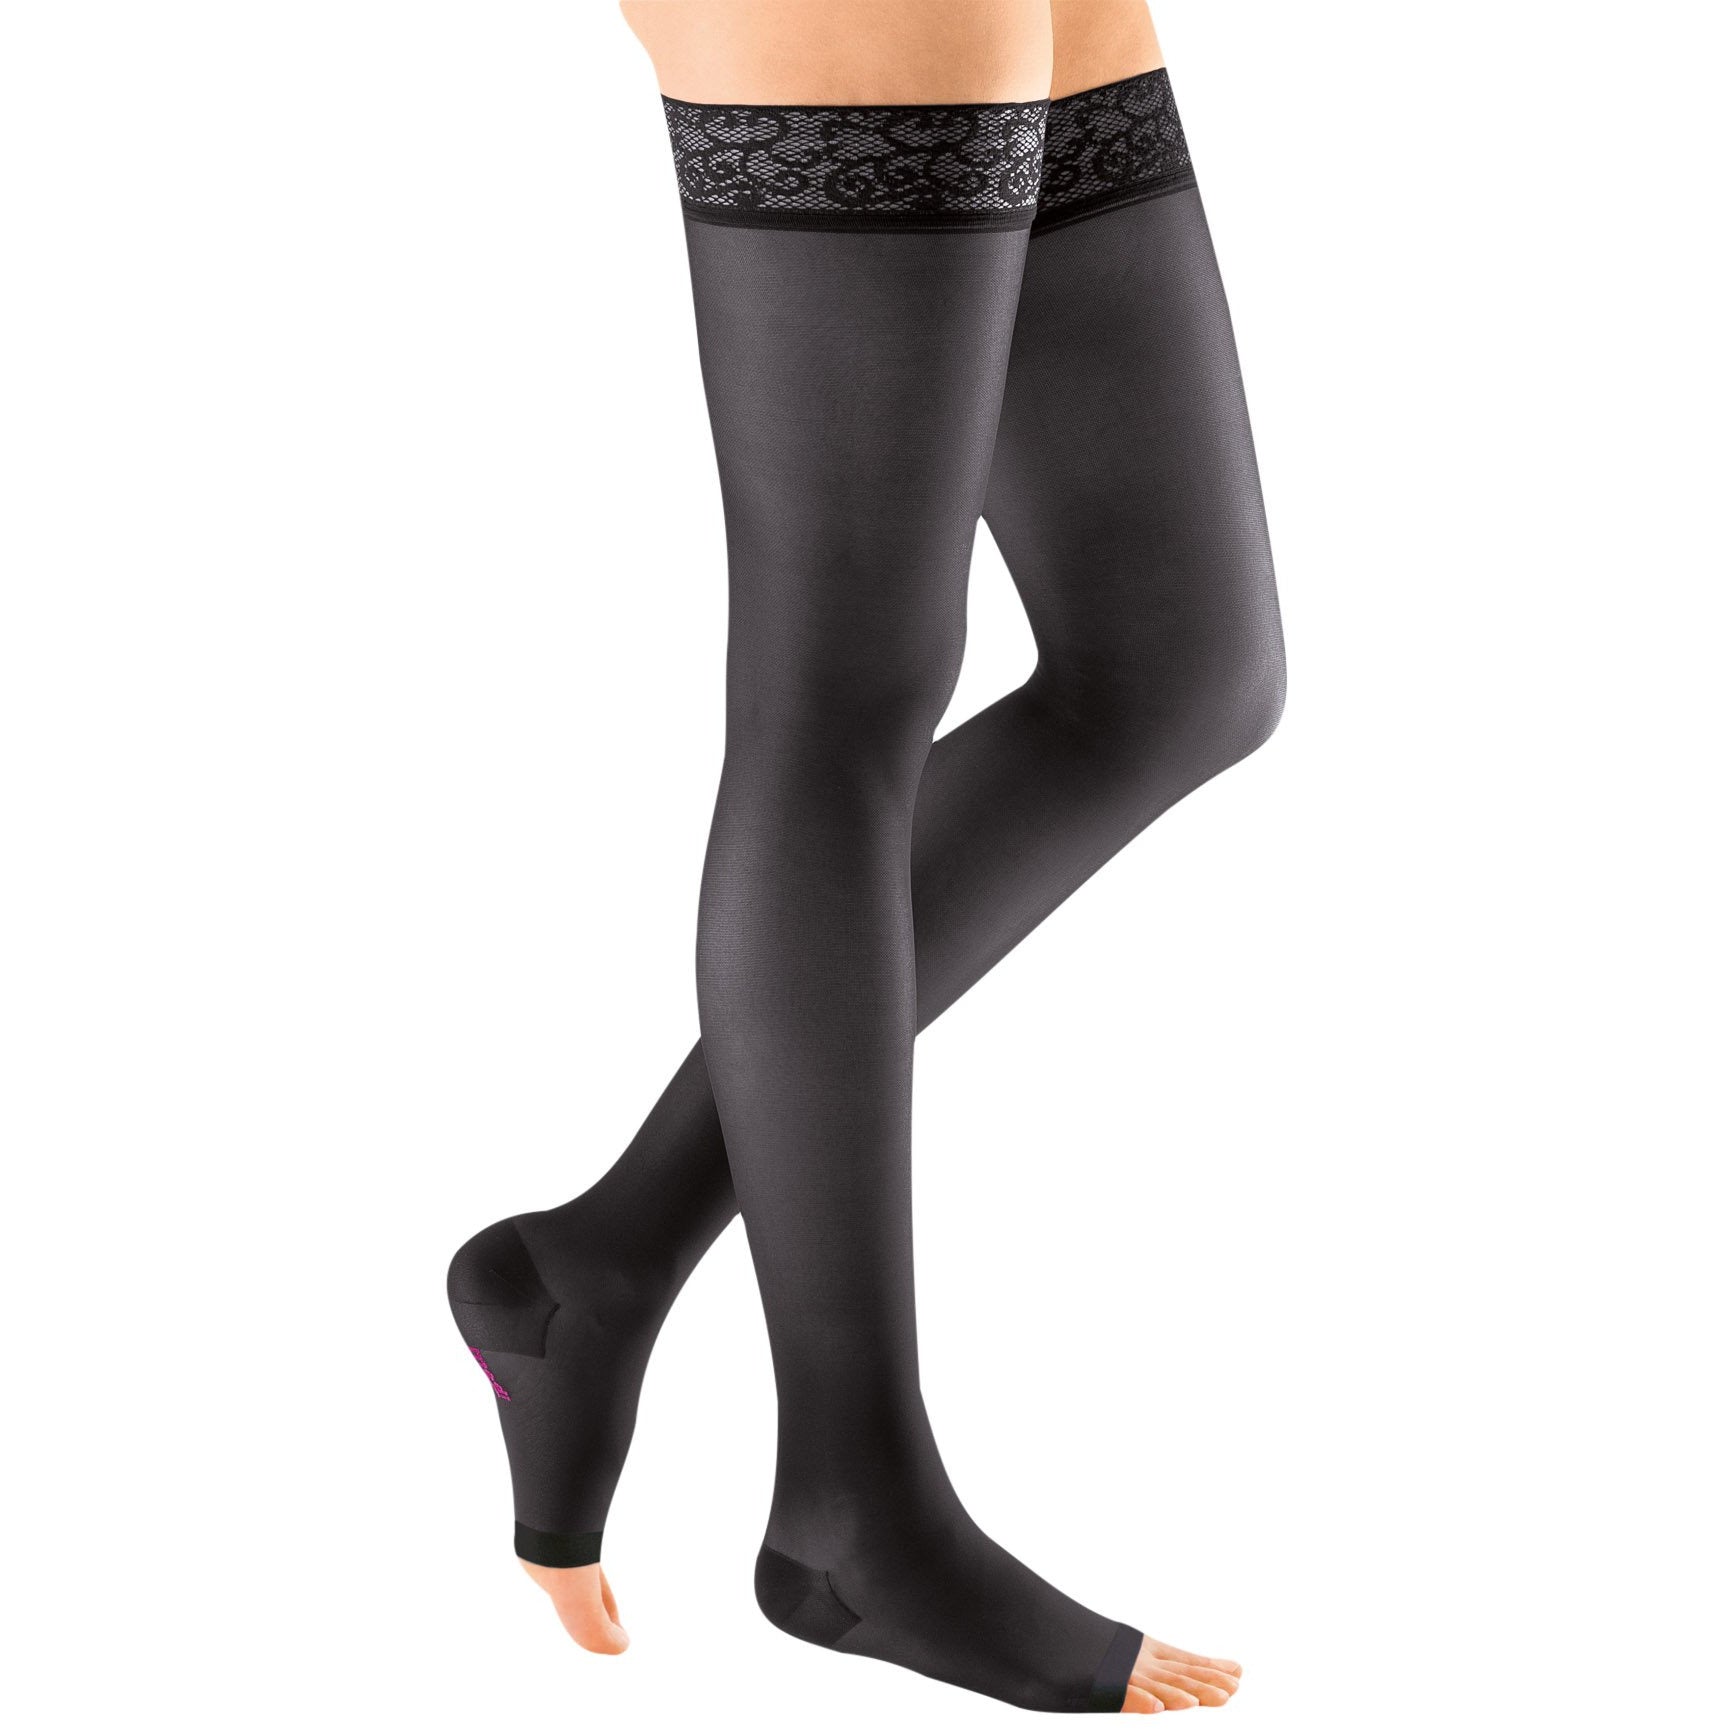 mediven sheer & soft, 30-40 mmHg, Thigh High with Lace Top-band, Close -  Sarasota Vascular Specialists